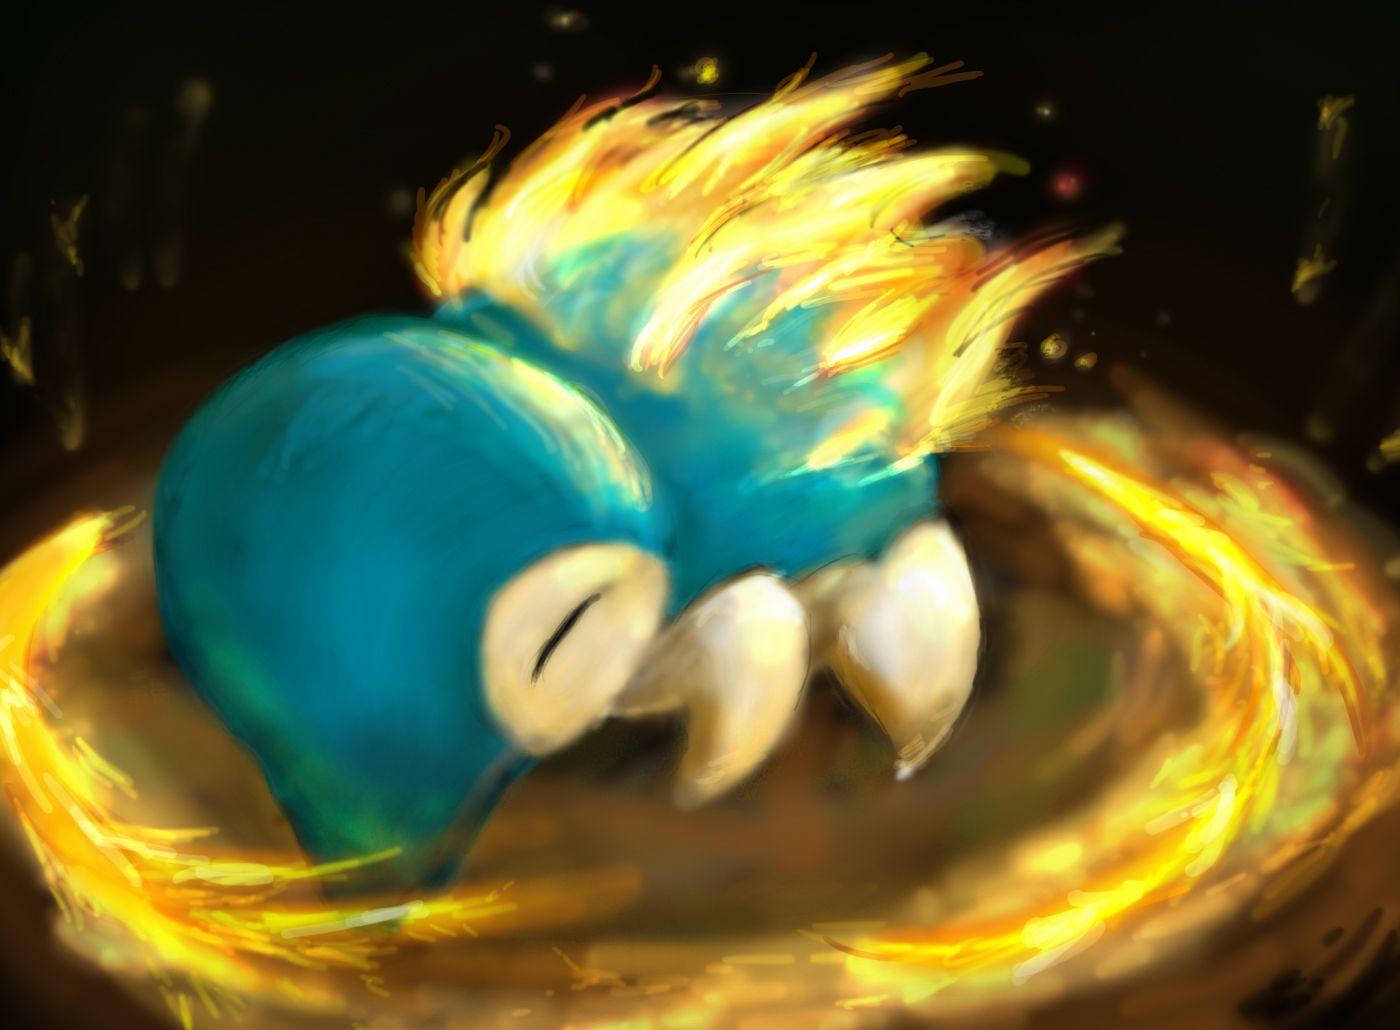 Cyndaquil used Fire Spin